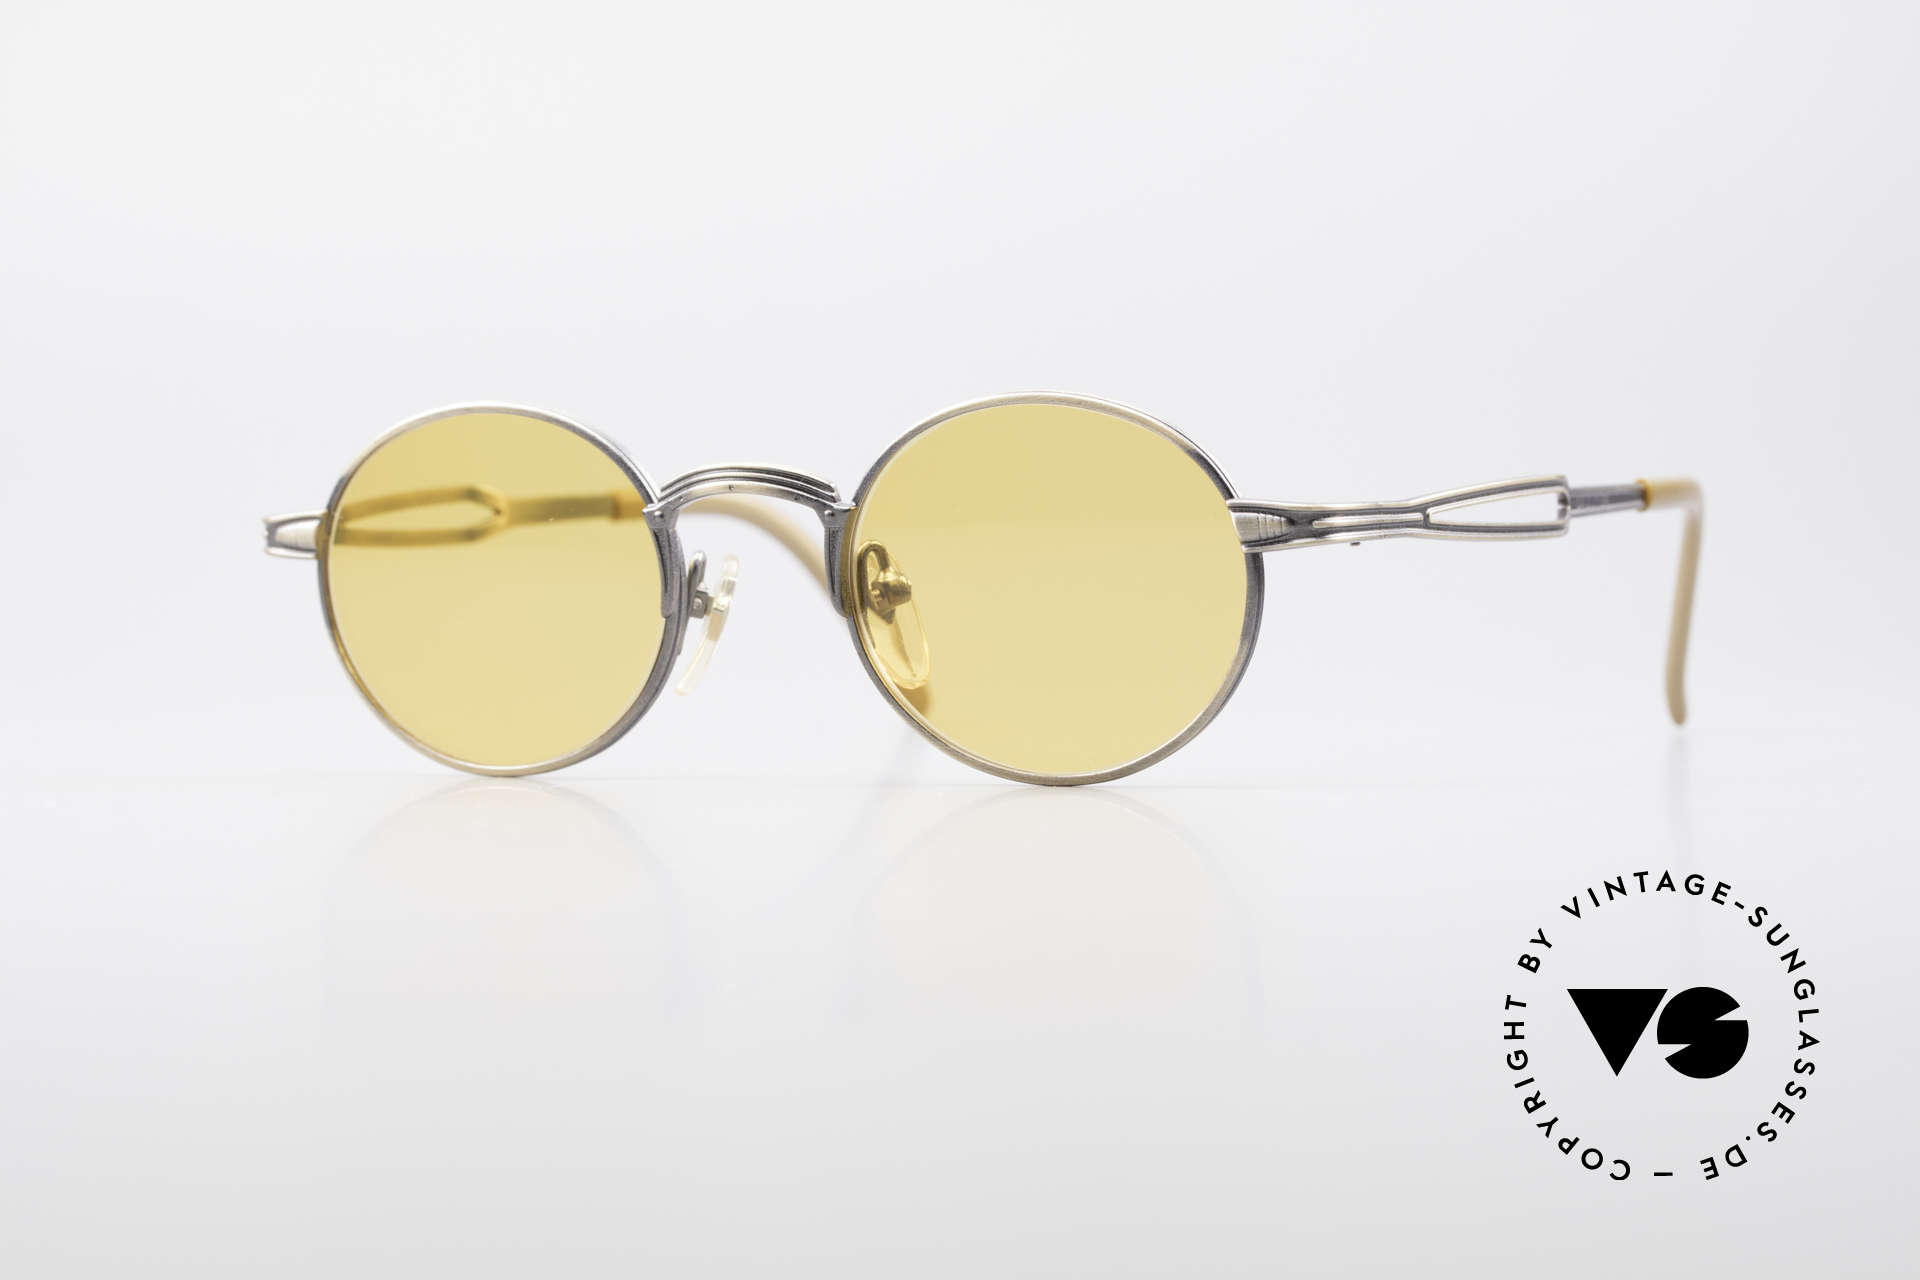 Jean Paul Gaultier 55-7107 Round Vintage Sunglasses, round vintage sunglasses by Jean Paul GAULTIER, Made for Men and Women